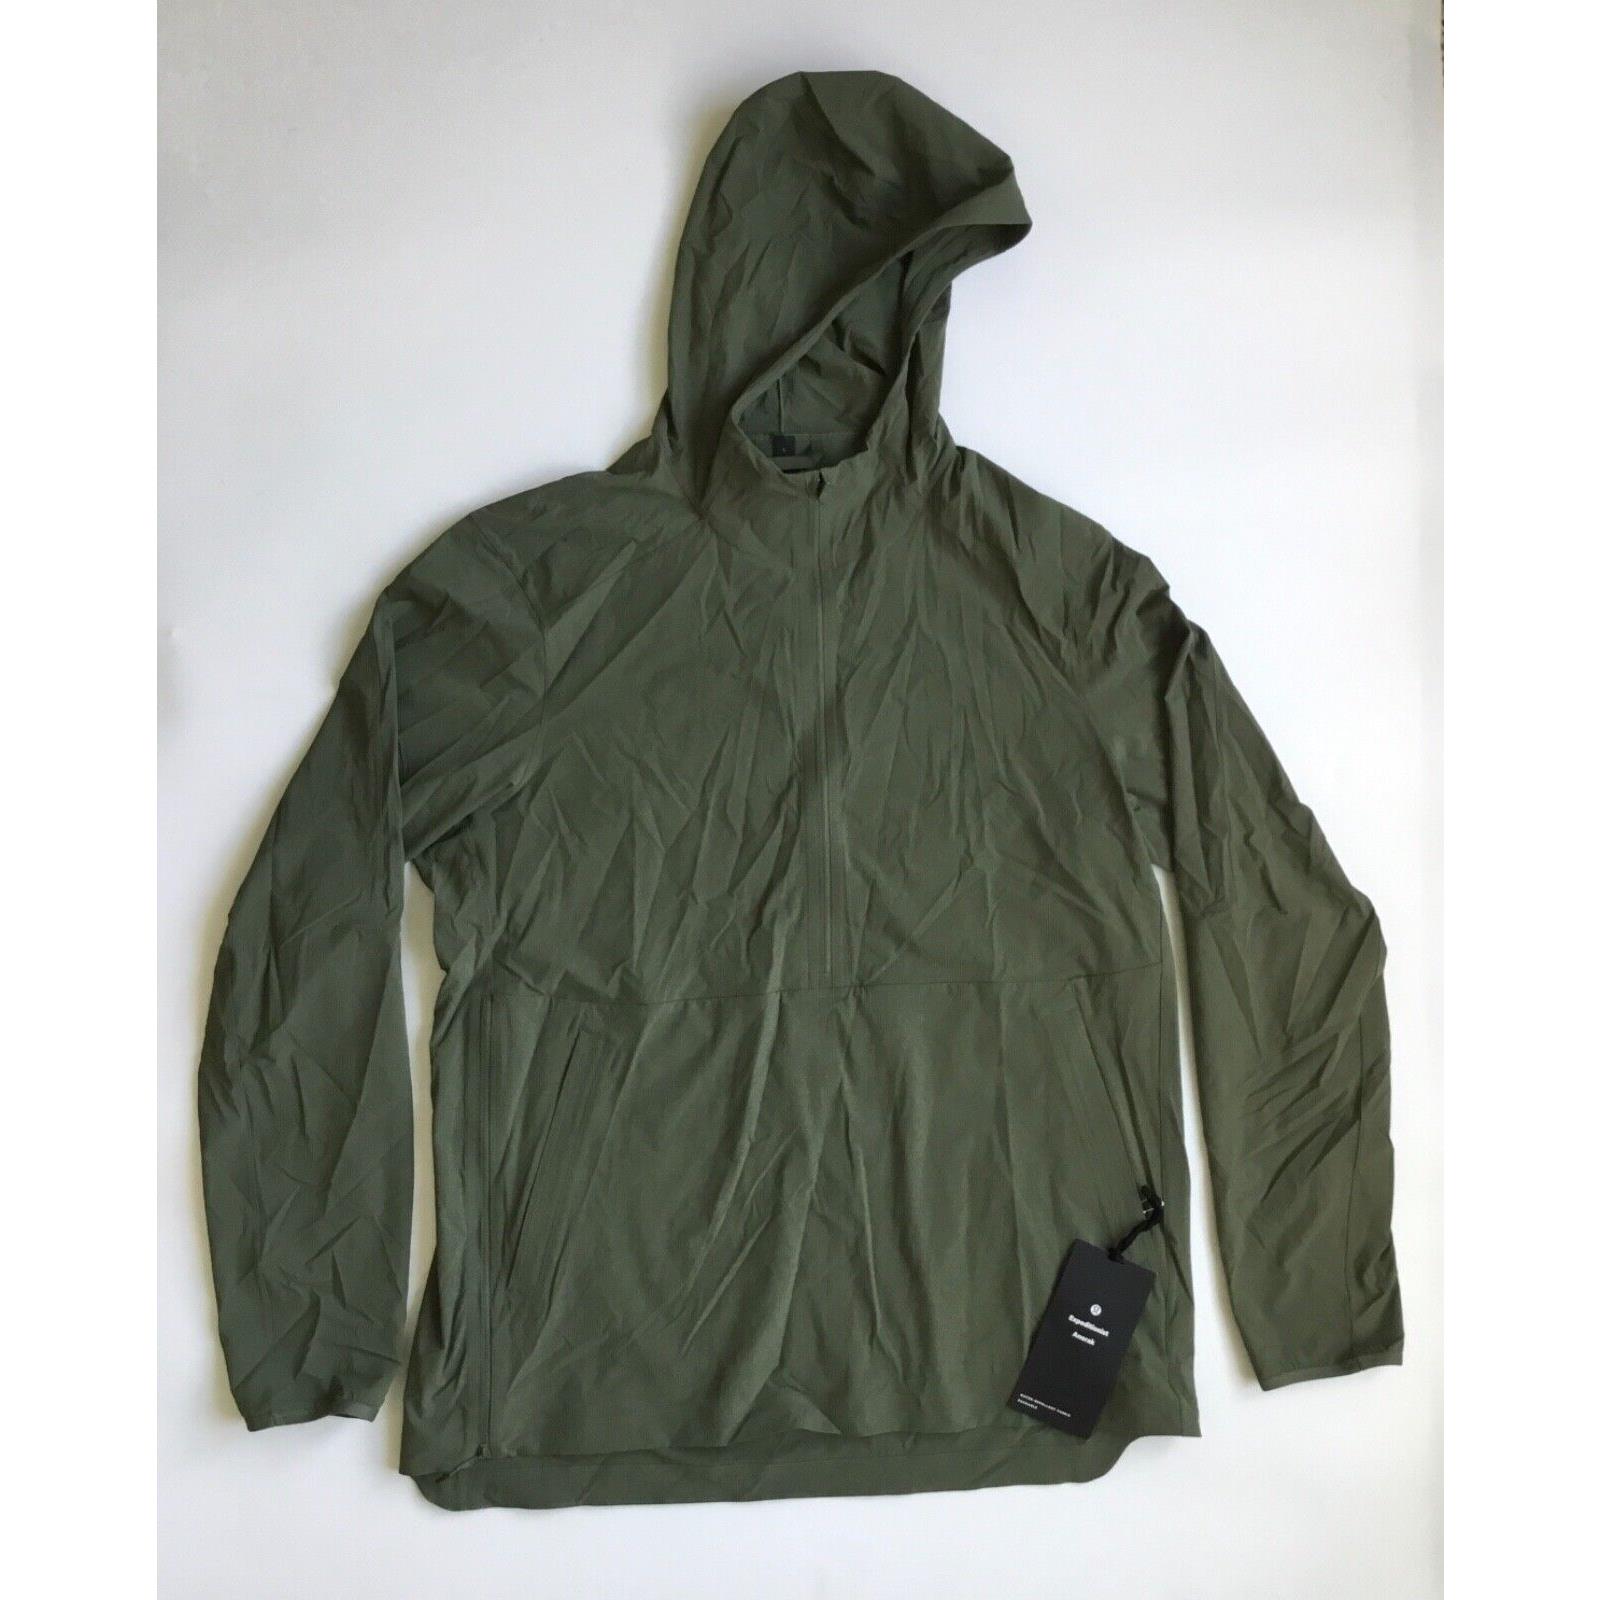 Lululemon Men s Expeditionist Anorak Packable Jacket LM4AC7S Meol Olive Green M